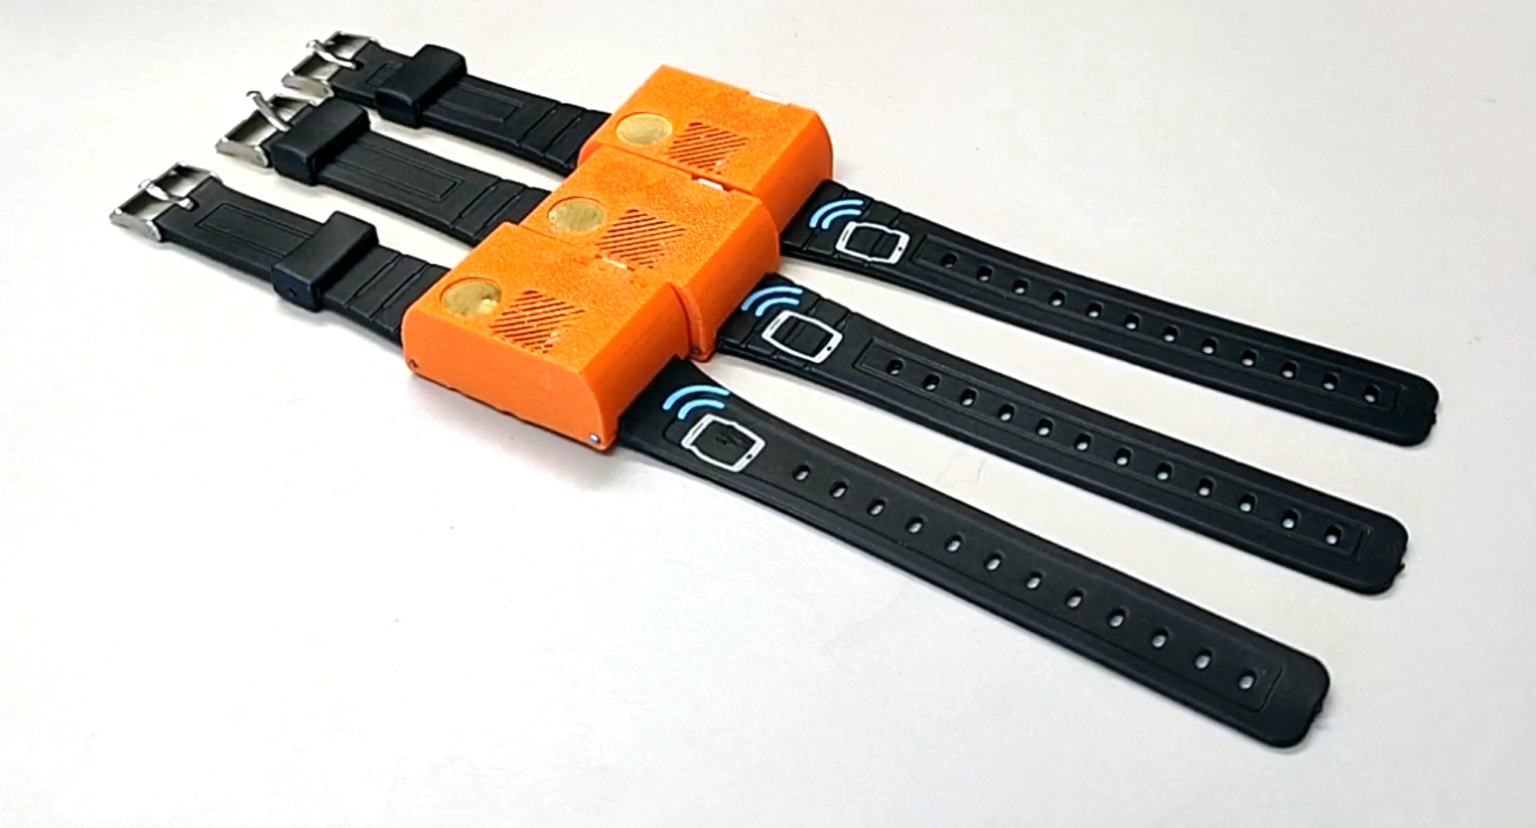 Telocate Bracelet – a Precise Social Distancing Support Solution | Telocate